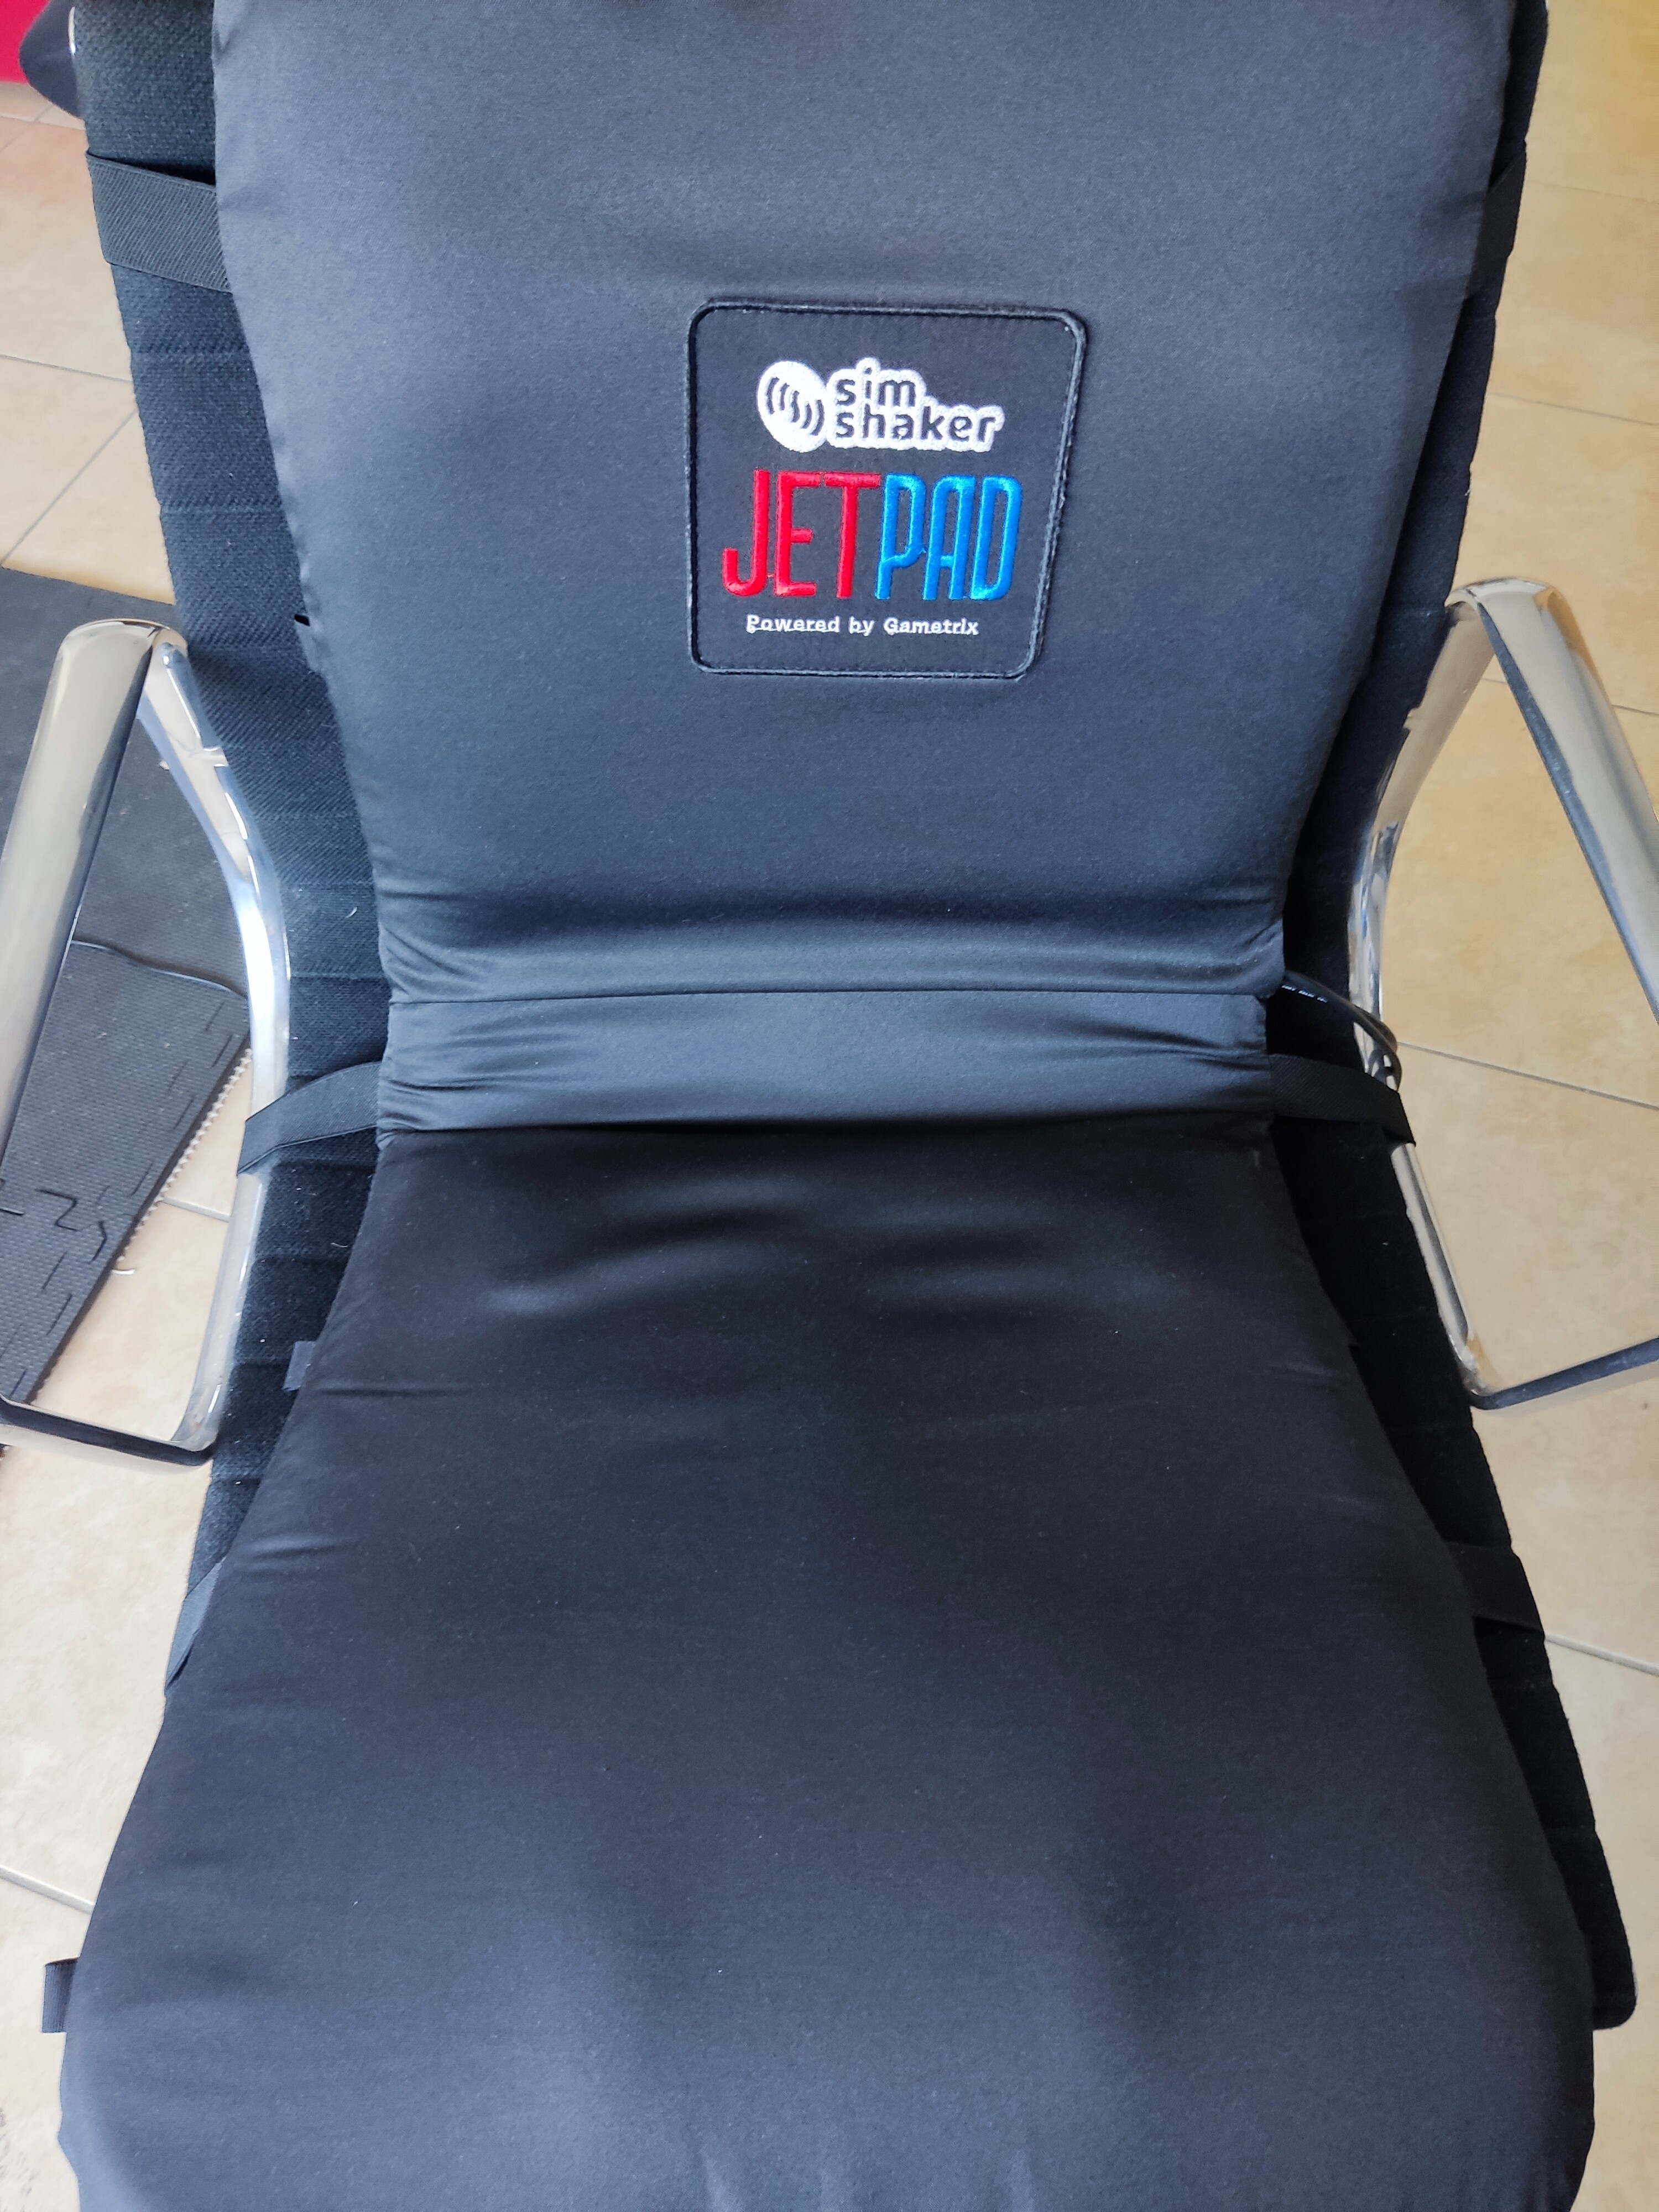 GAMETRIX KW-908 JETSEAT - Page 113 - PC Hardware and Related Software - ED  Forums